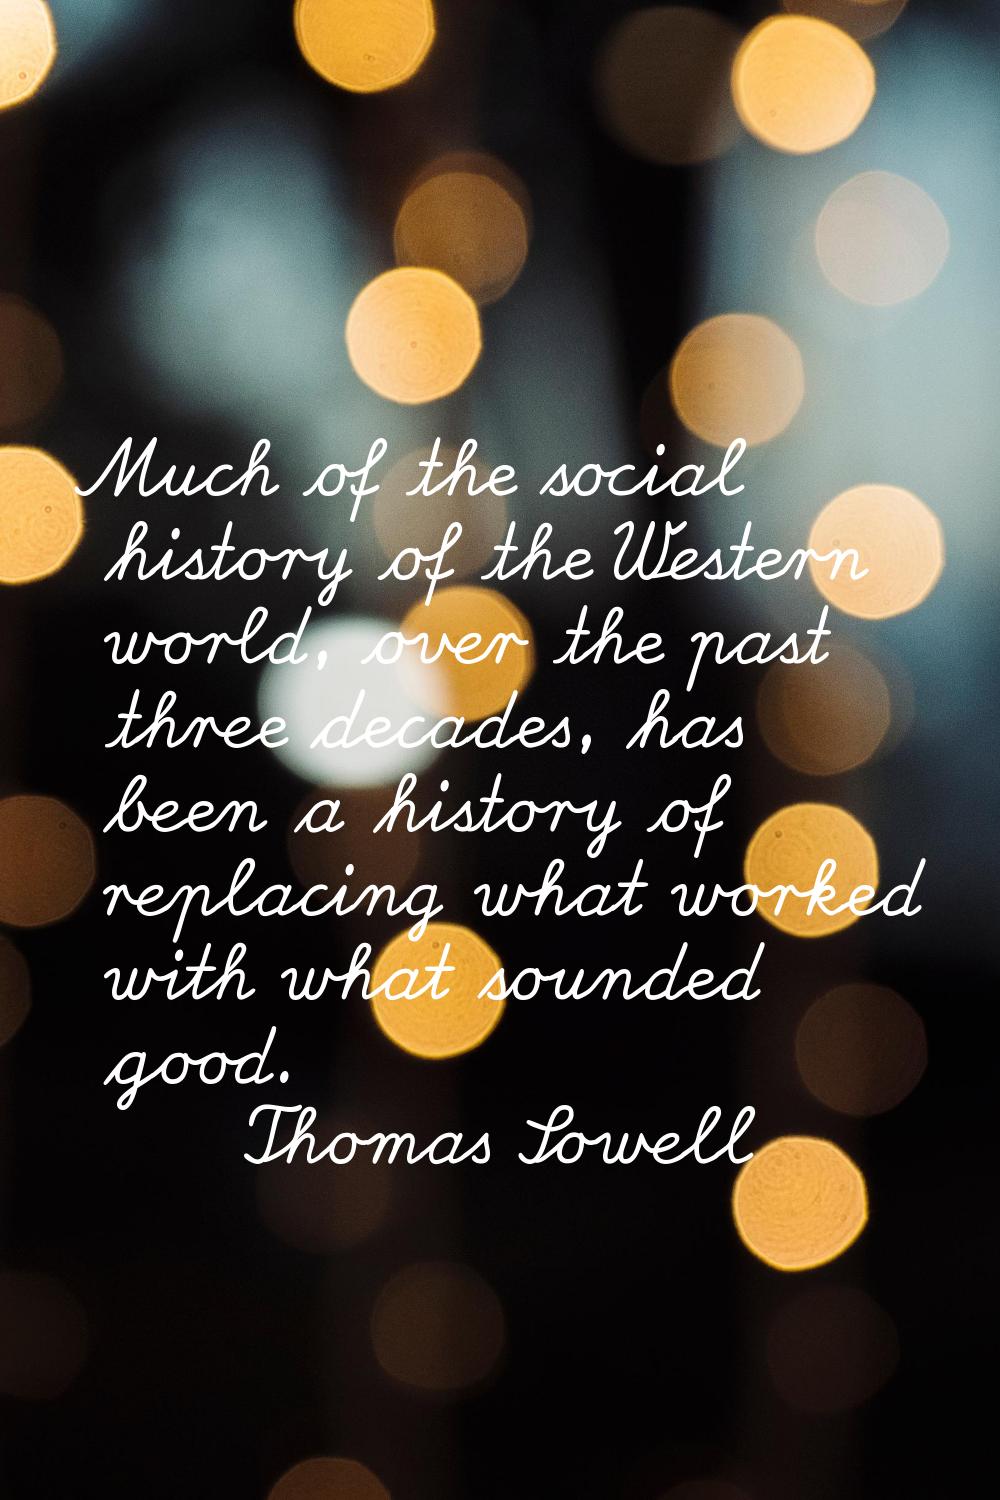 Much of the social history of the Western world, over the past three decades, has been a history of